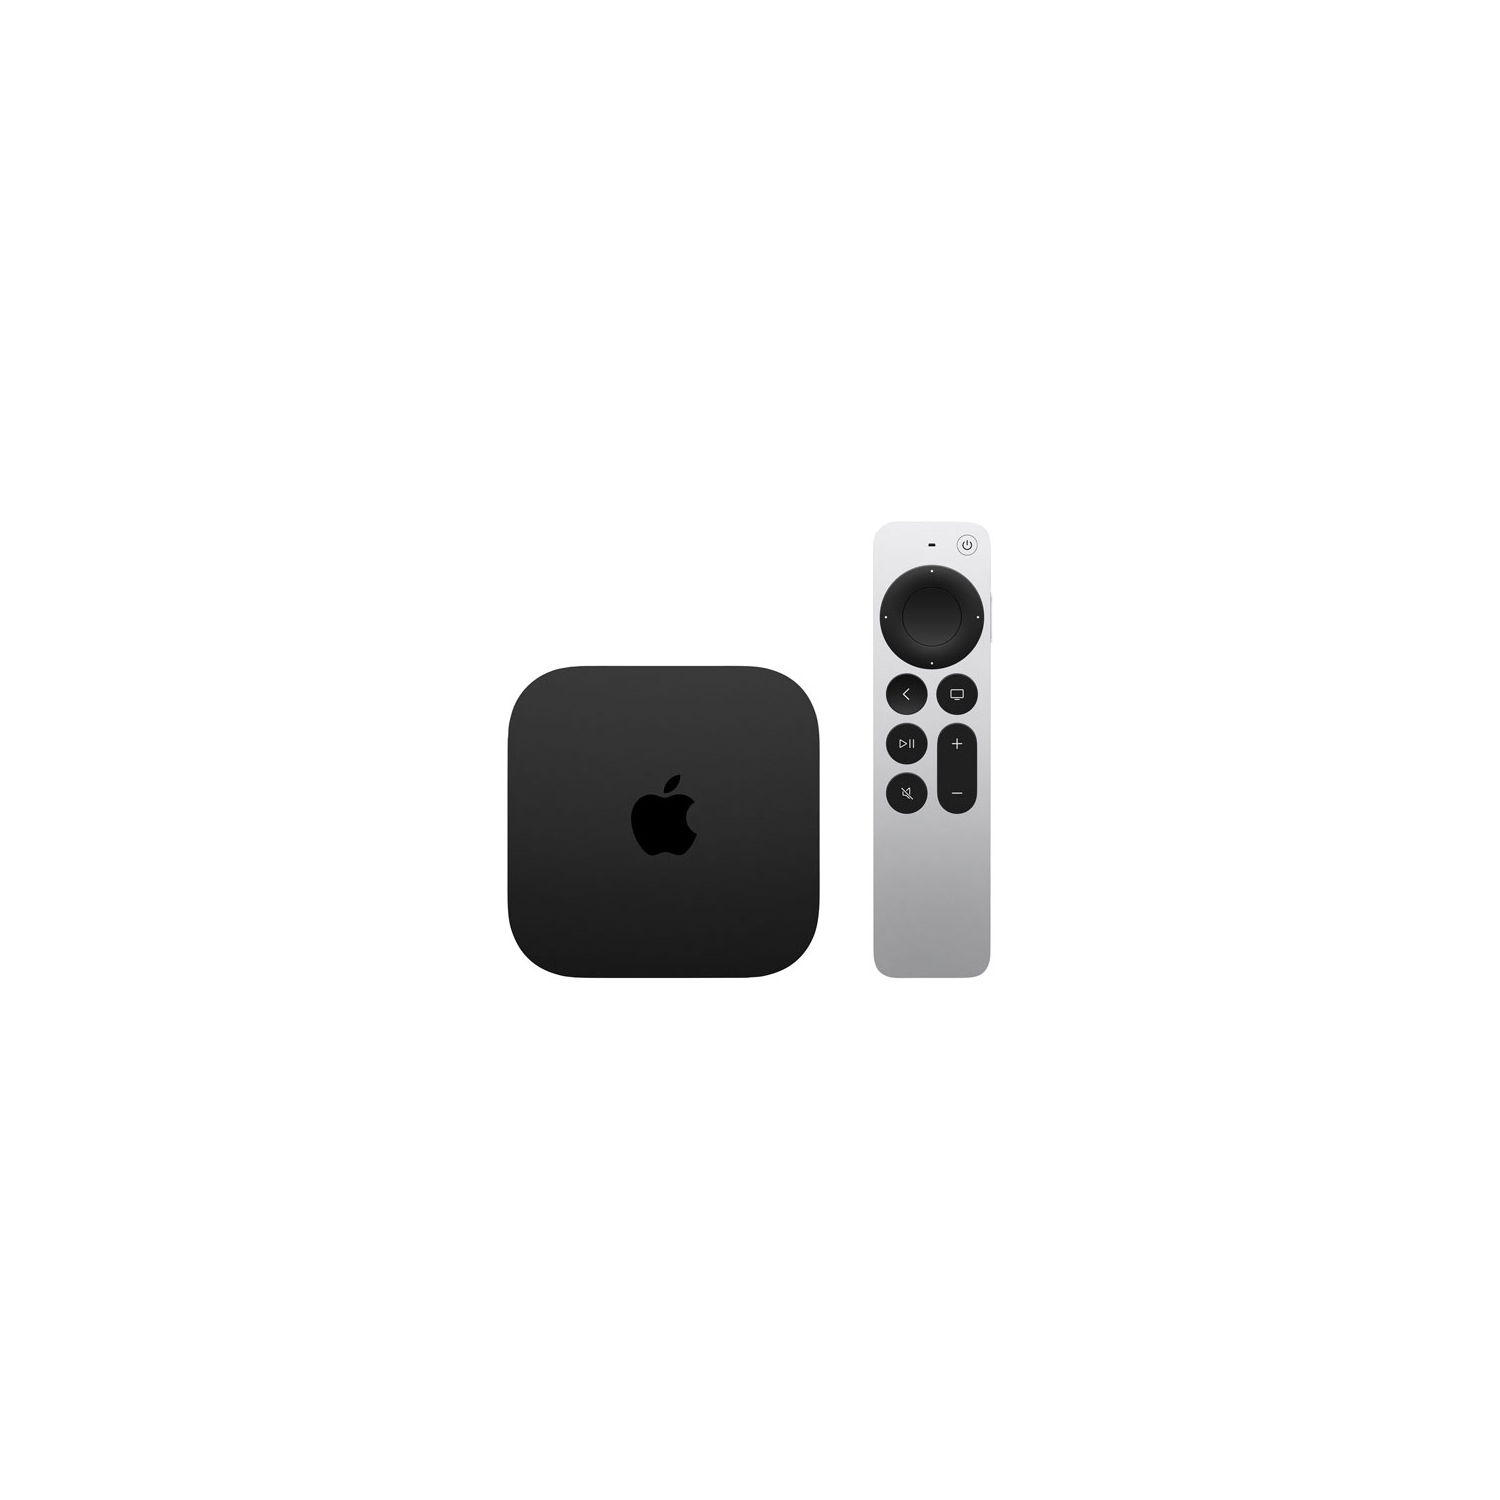 Refurbished (Excellent) - Apple TV 4K 64GB with Wi-Fi (3rd Generation)